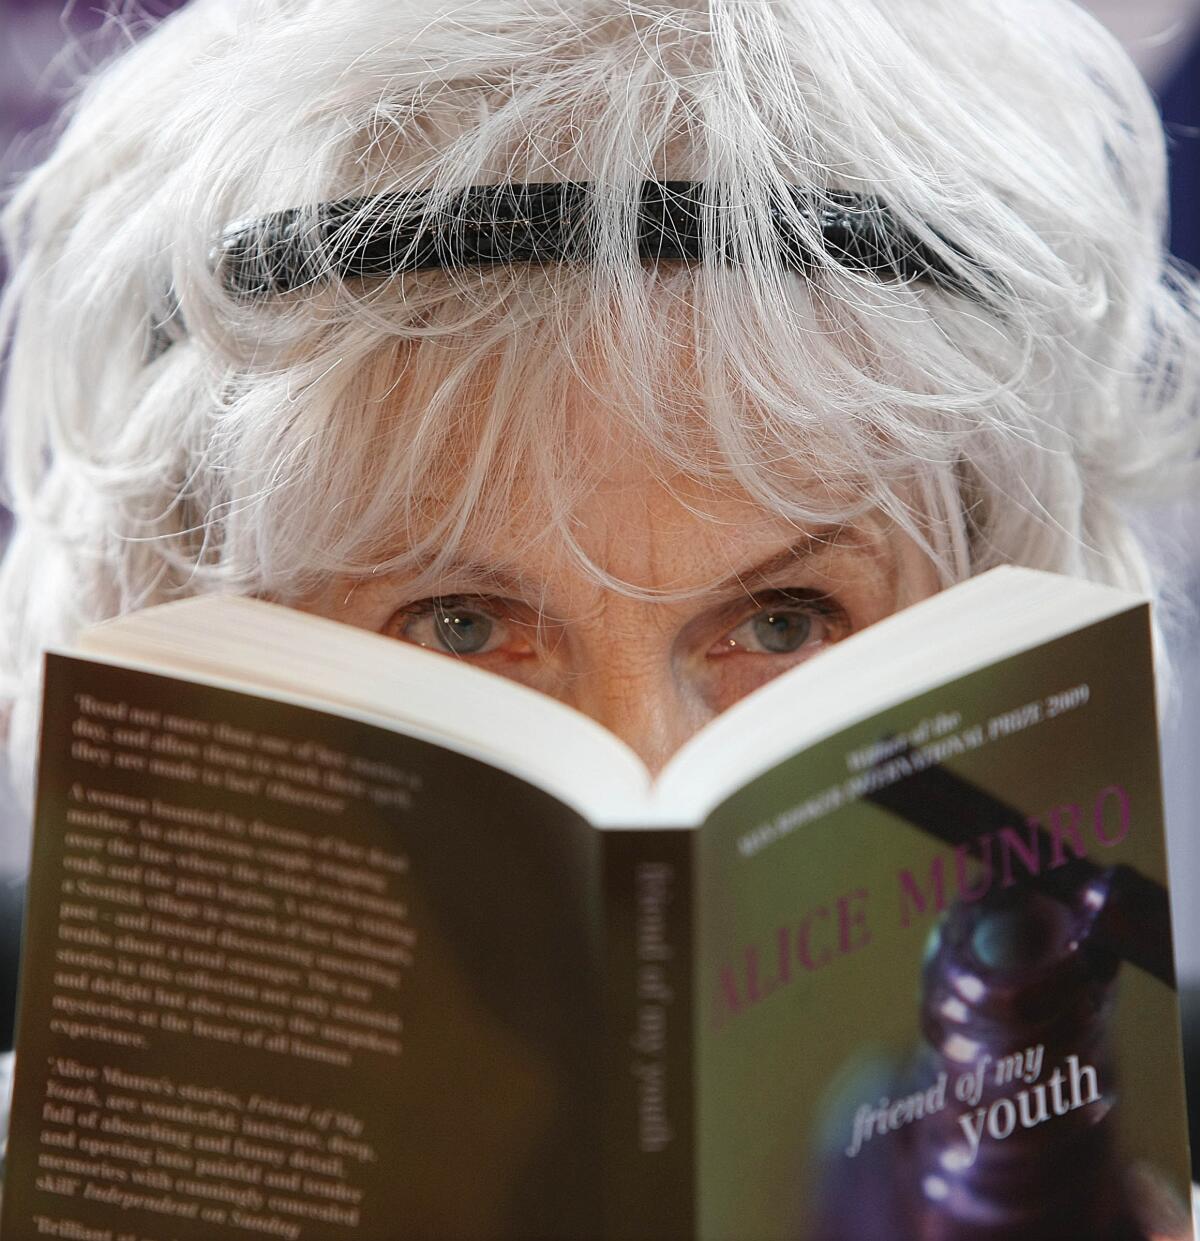 Alice Munro holding an open book and looking over it